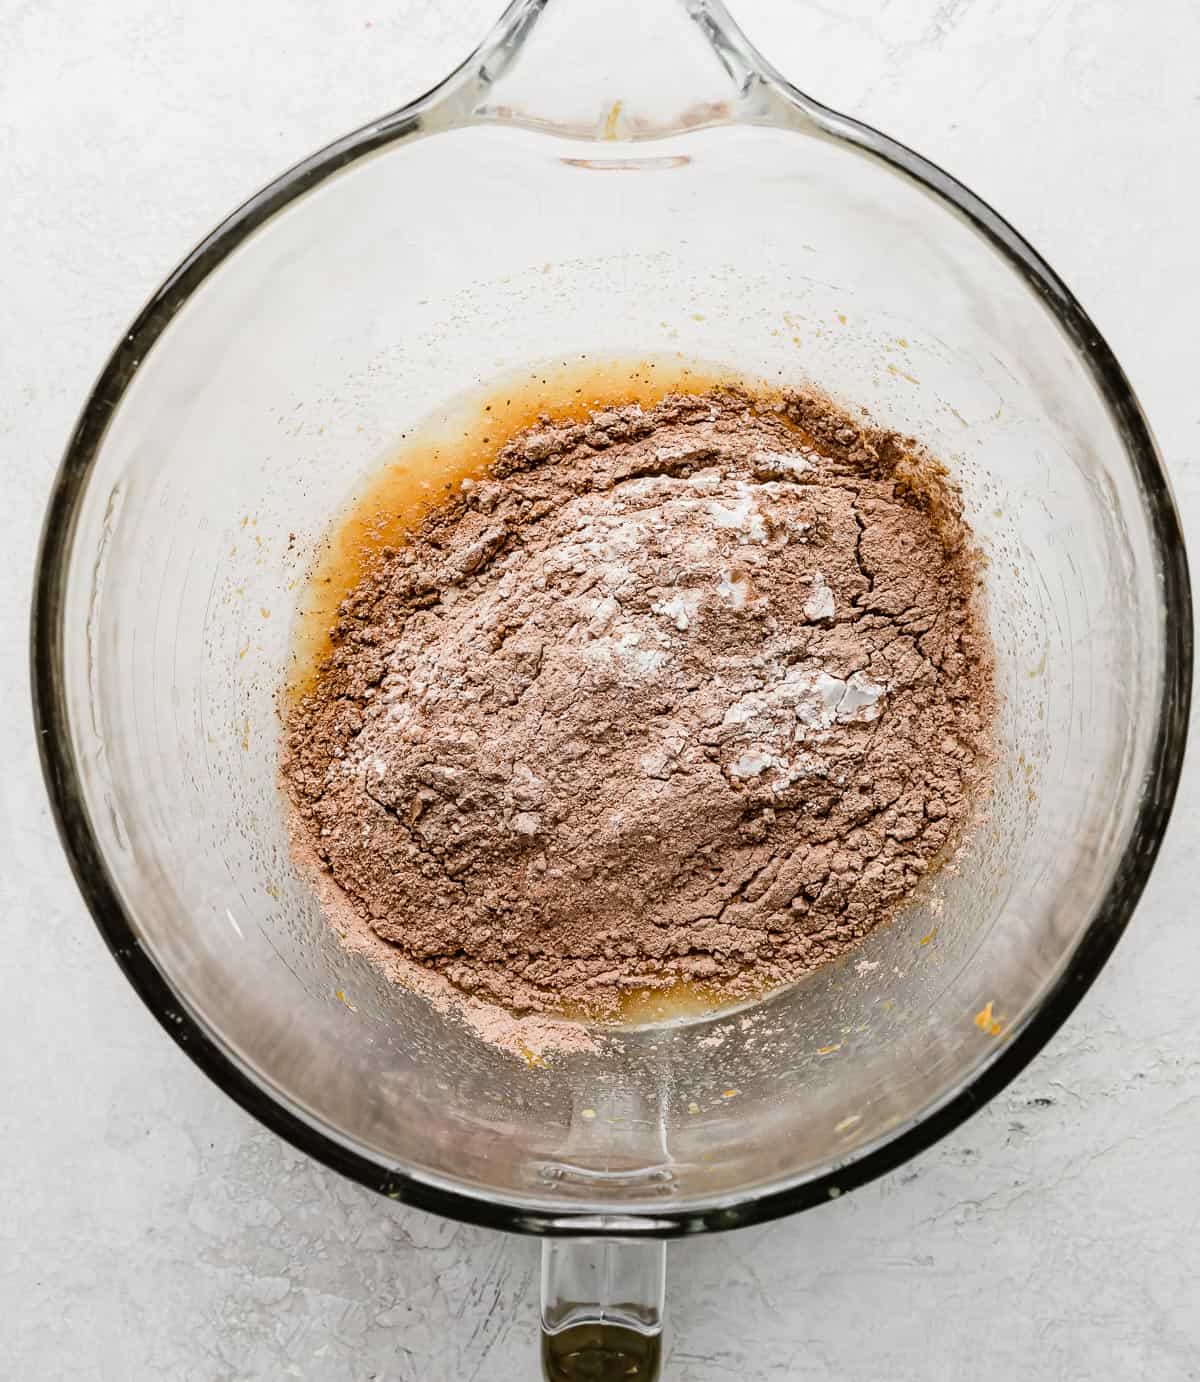 A light brown flour mixture in a glass stand mixer bowl on a gray background.